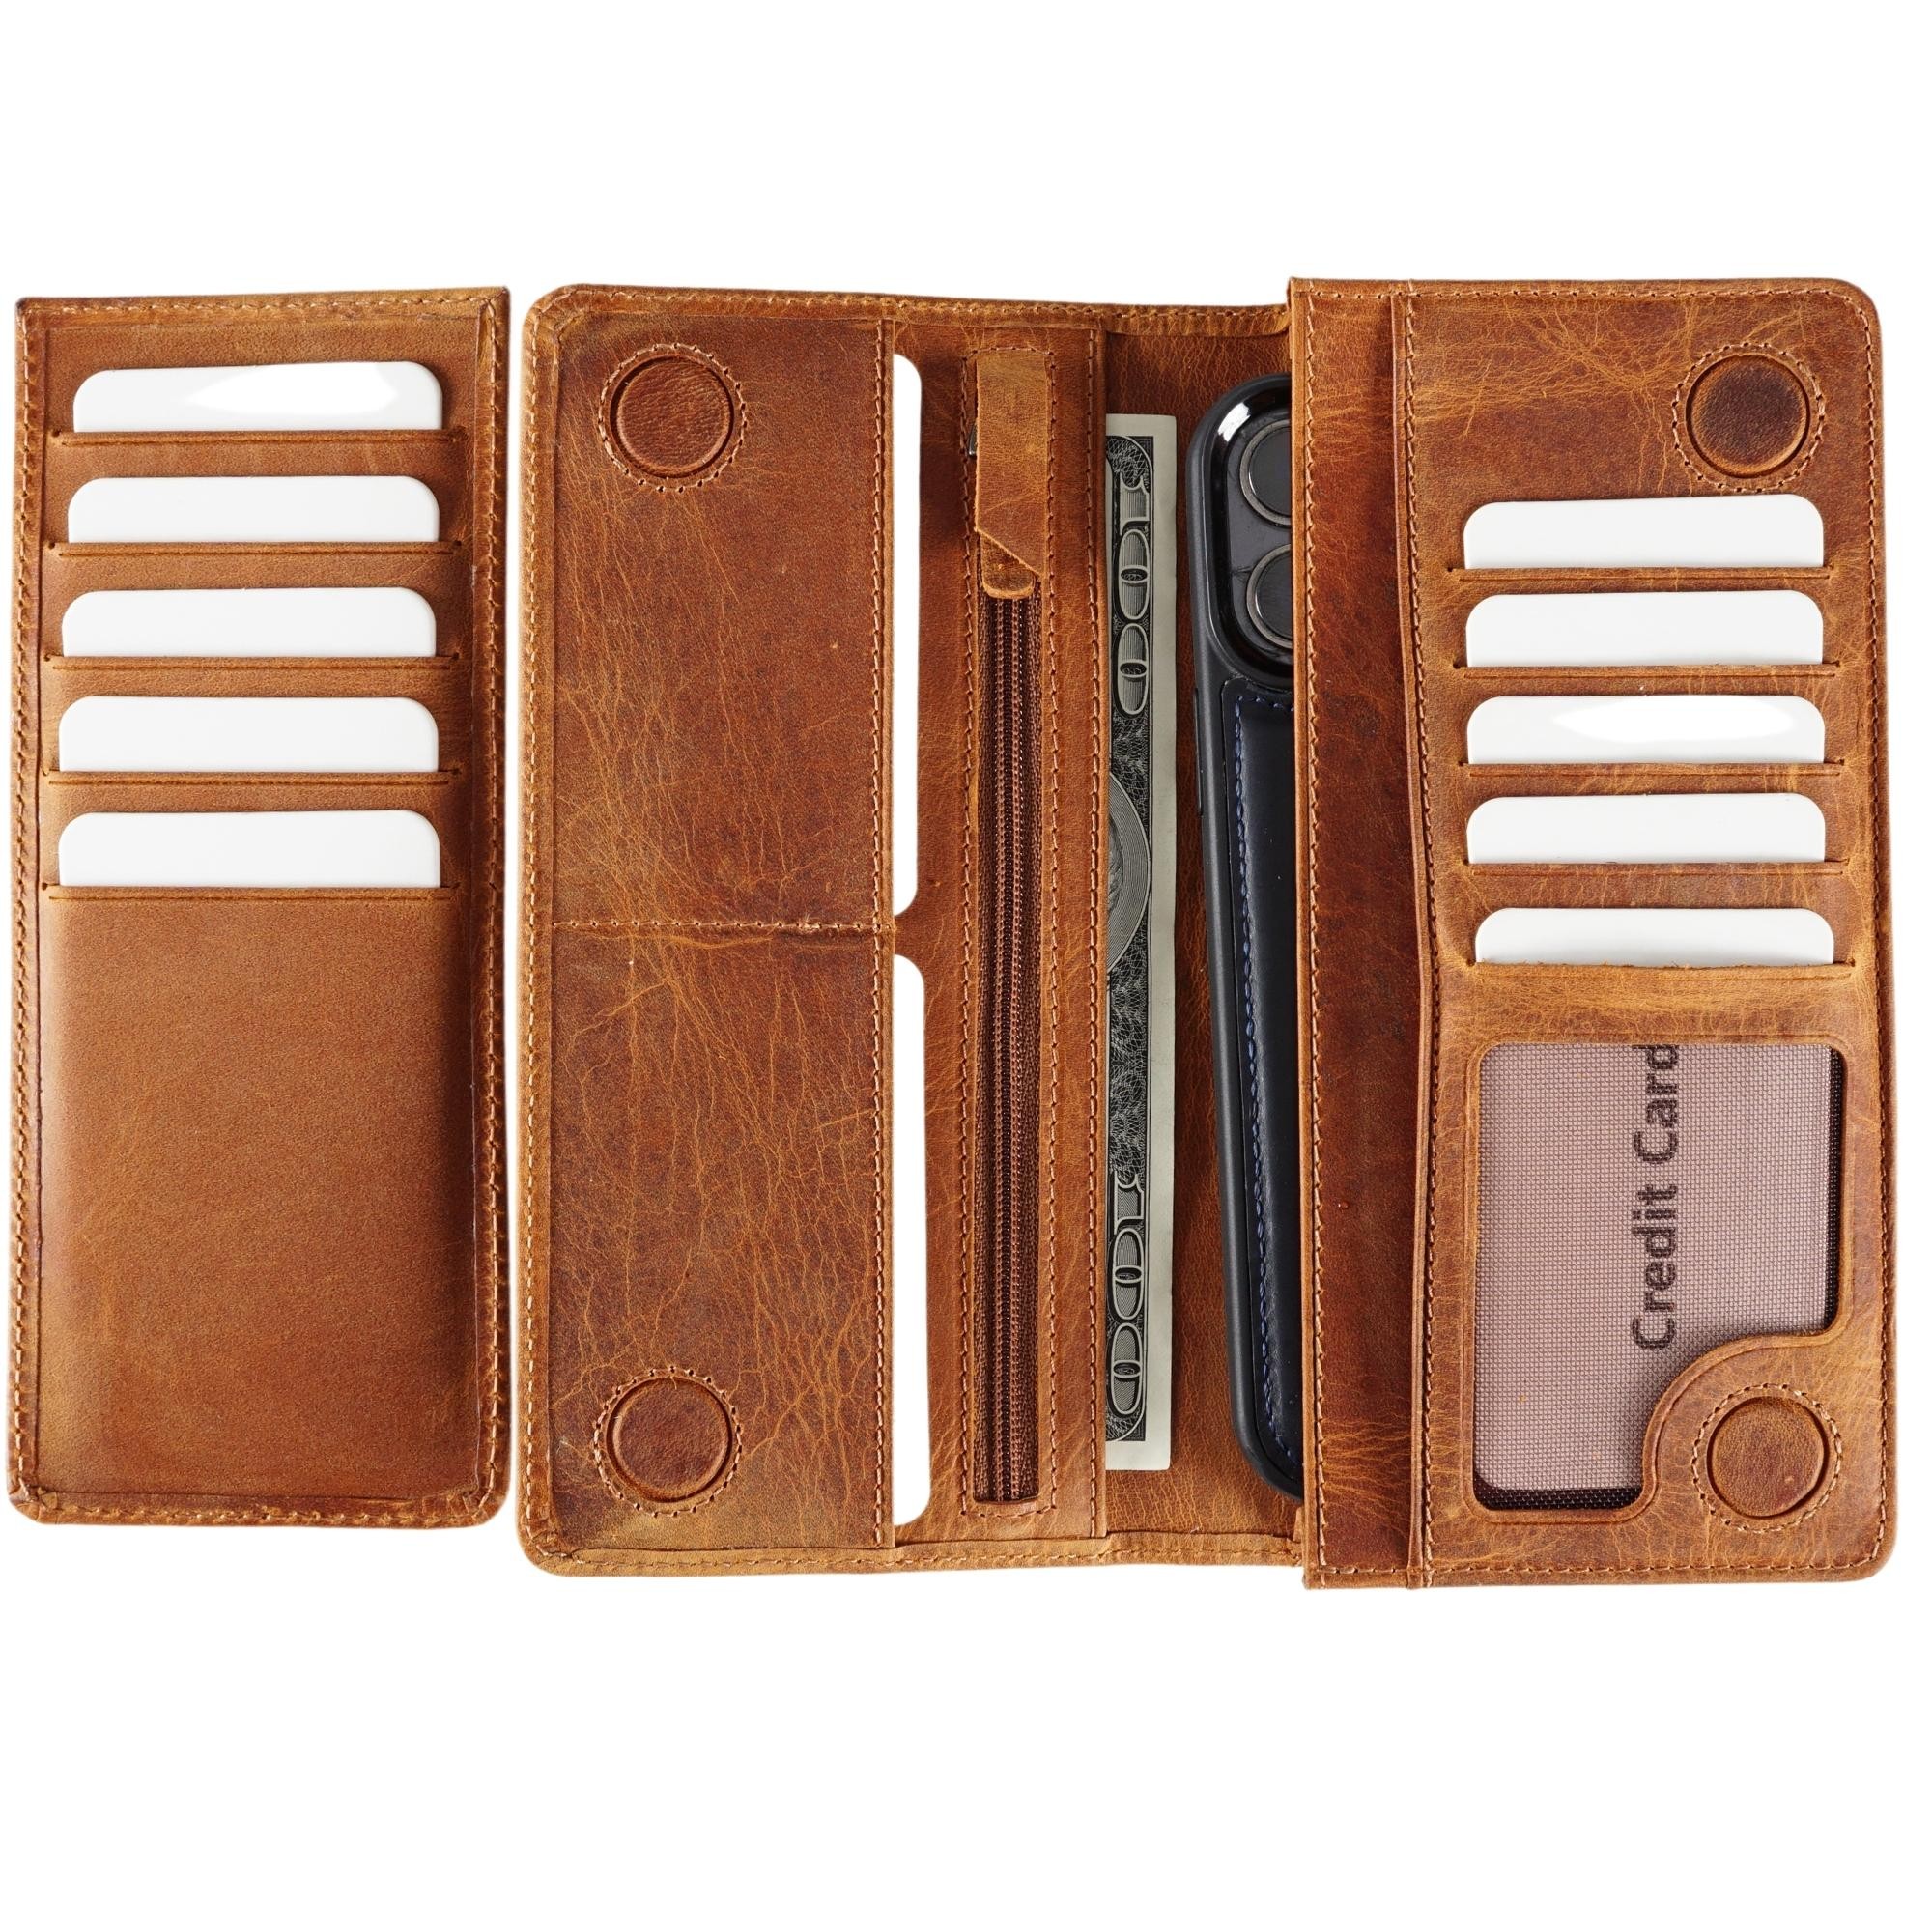 Genuine Leather Wallet with Phone - Tan